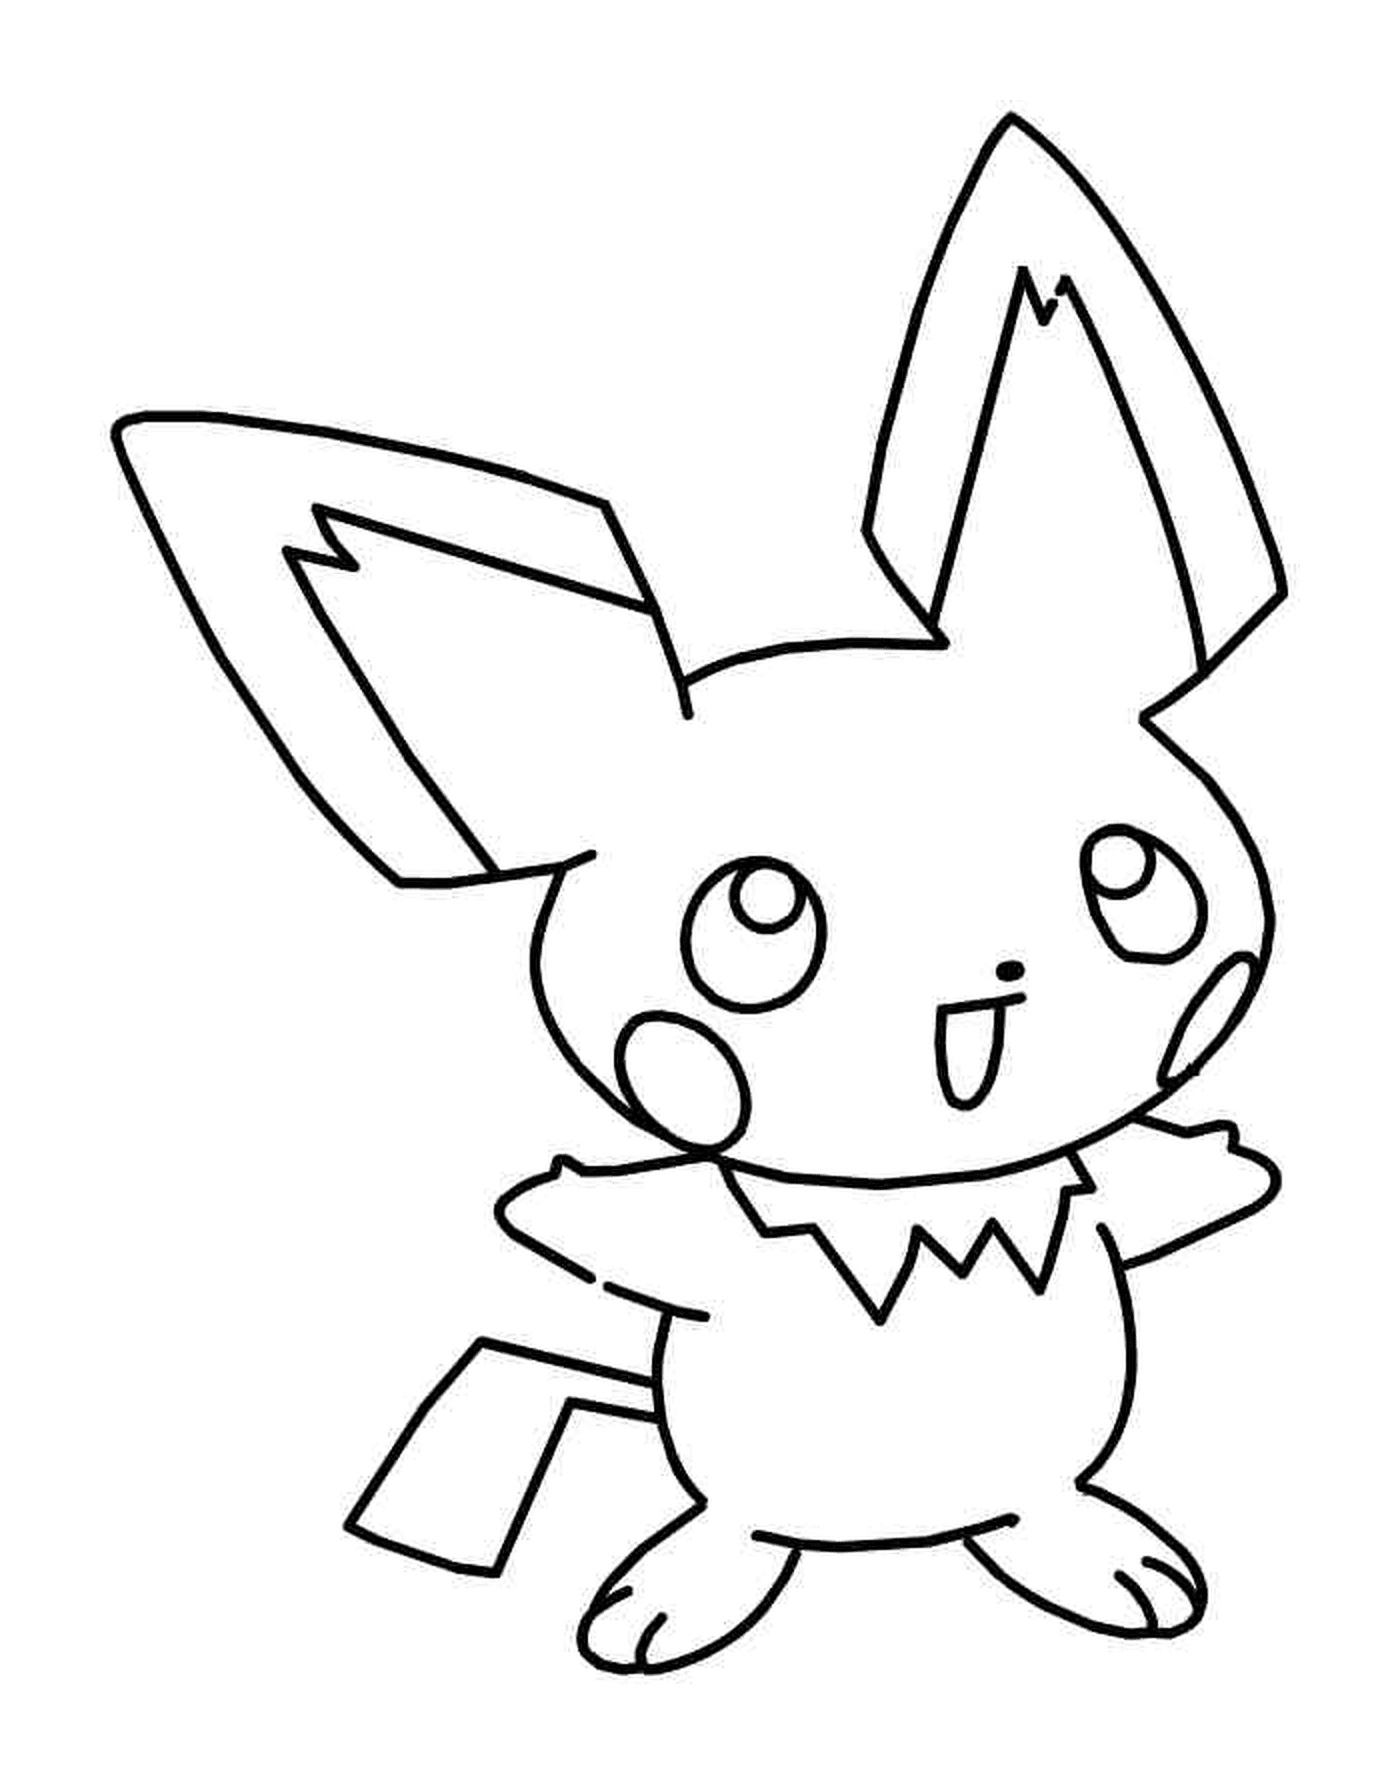  Pikachu with a quiet expression 